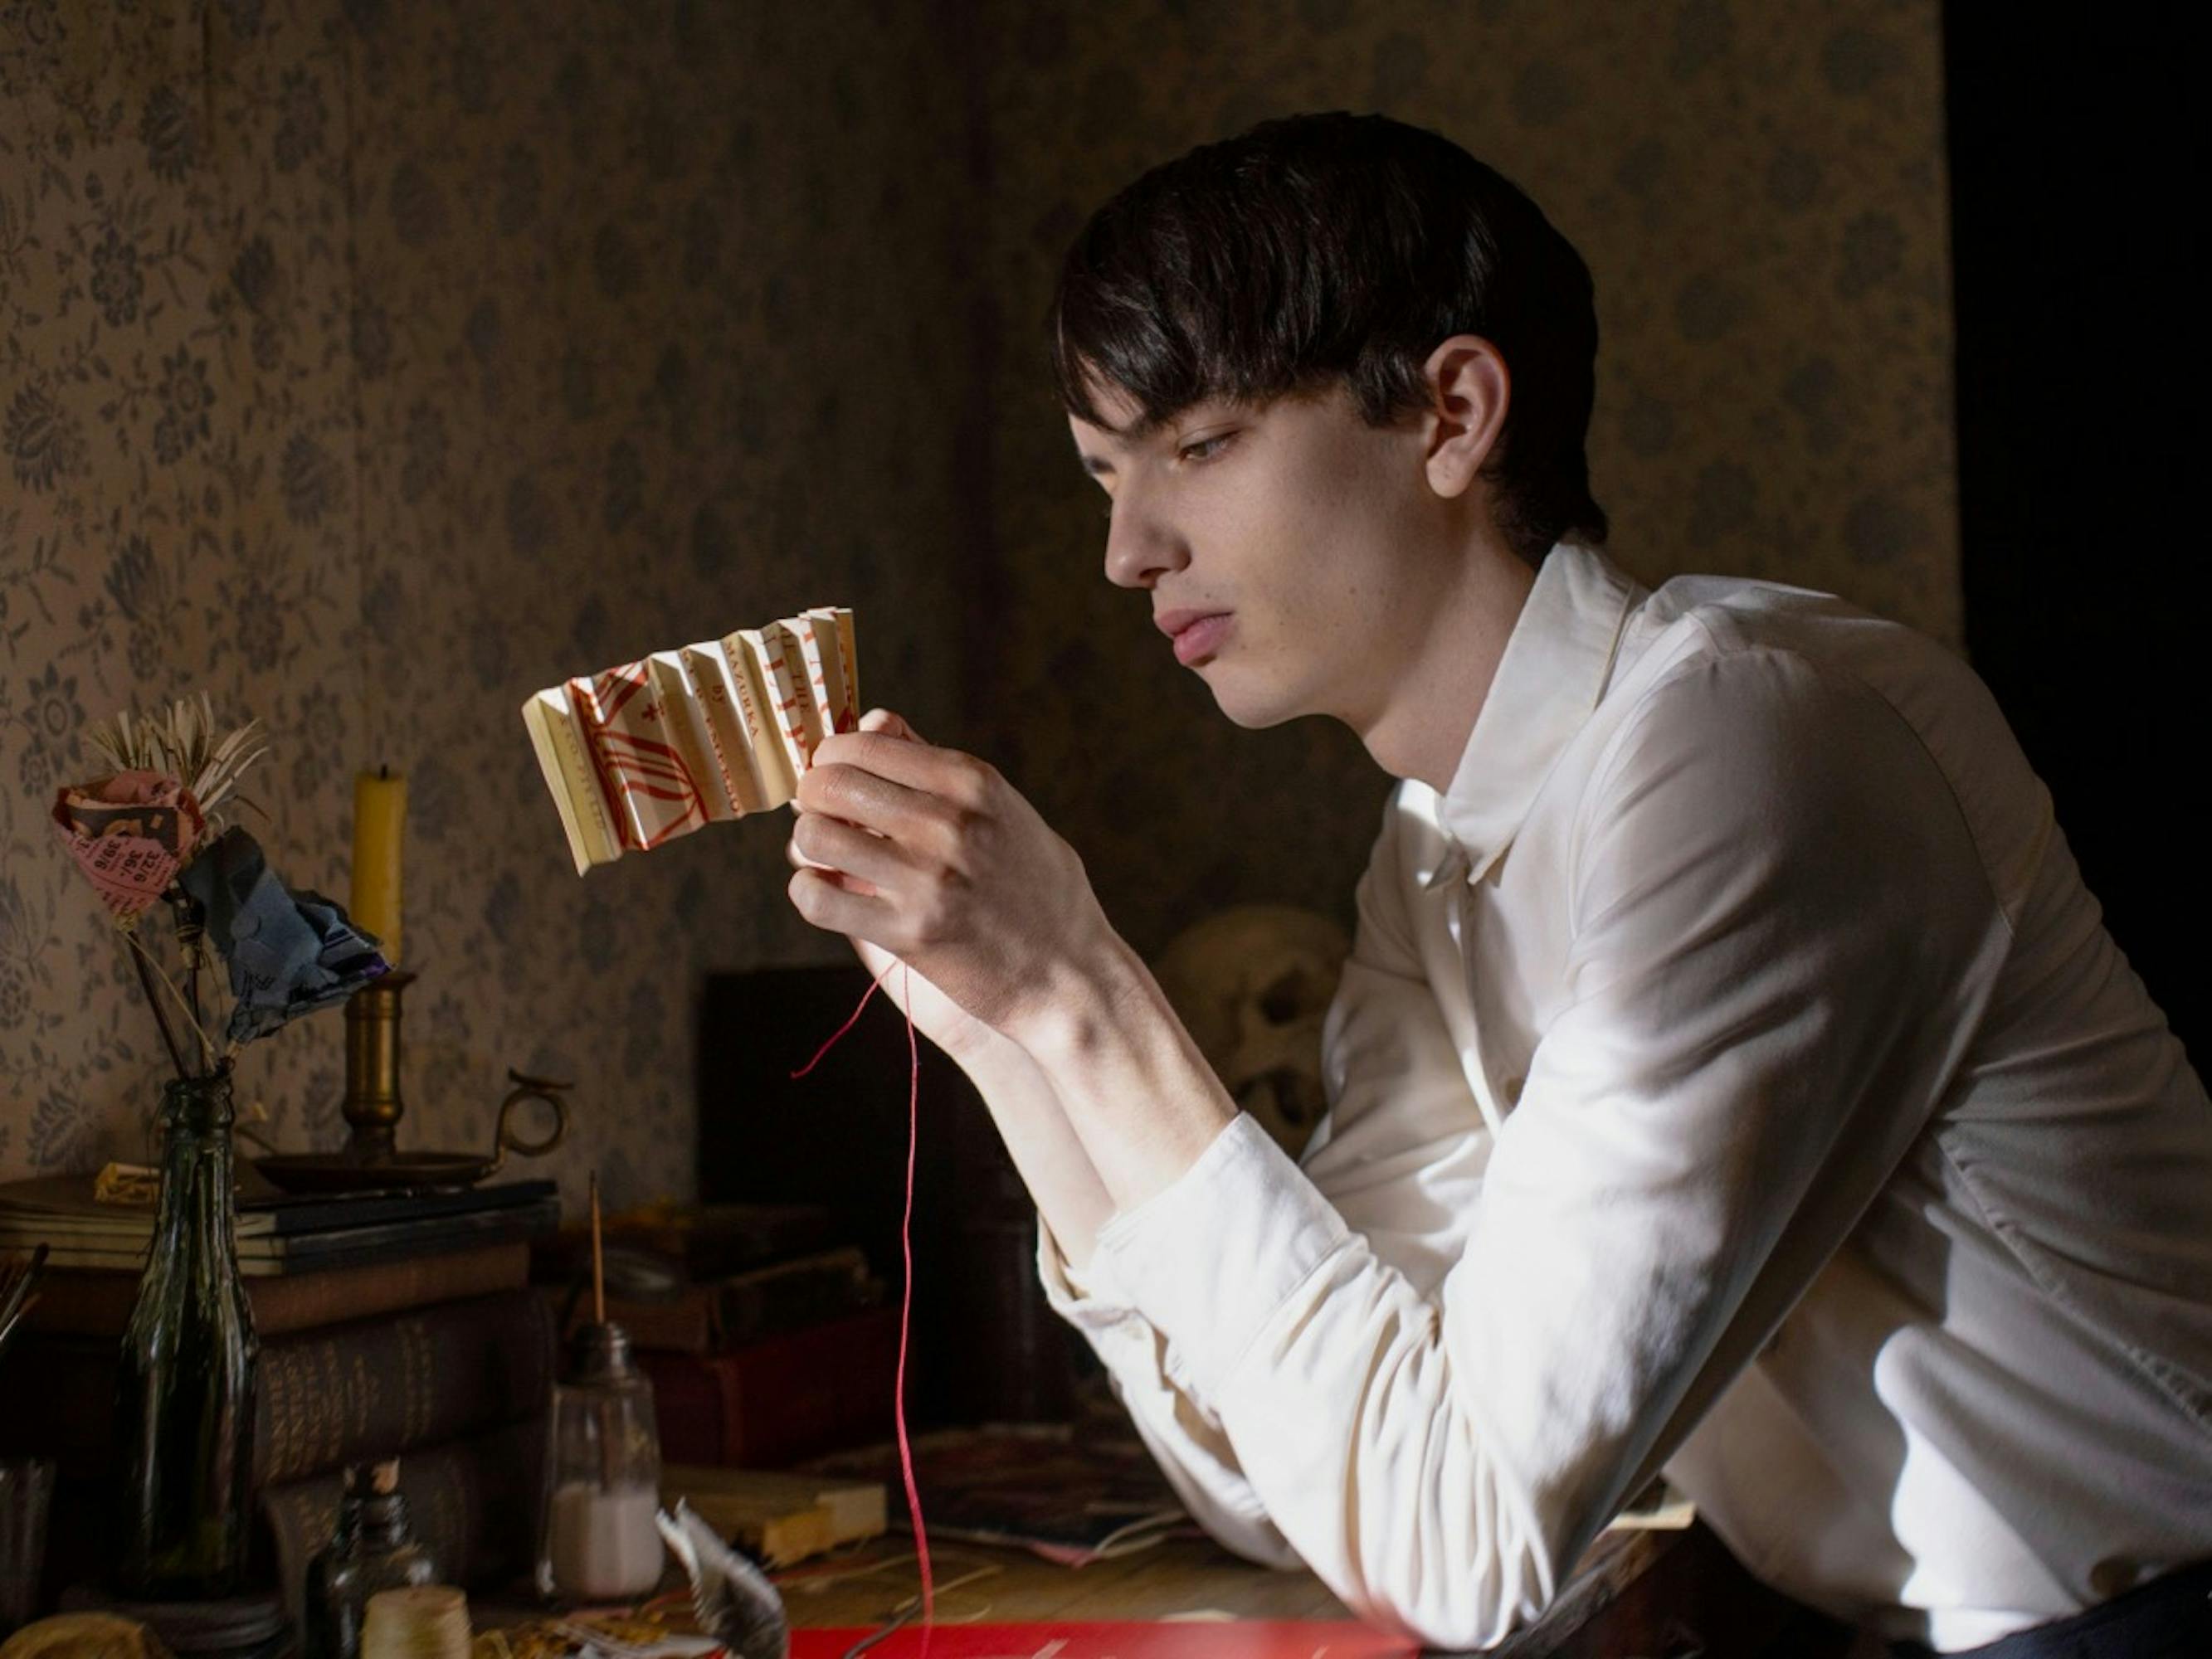 Kodi Smit-McPhee’s character Peter sits alone in a dimly lit room crafting a piece of paper and red string. He wears a white buttoned-down shirt and looks serious.